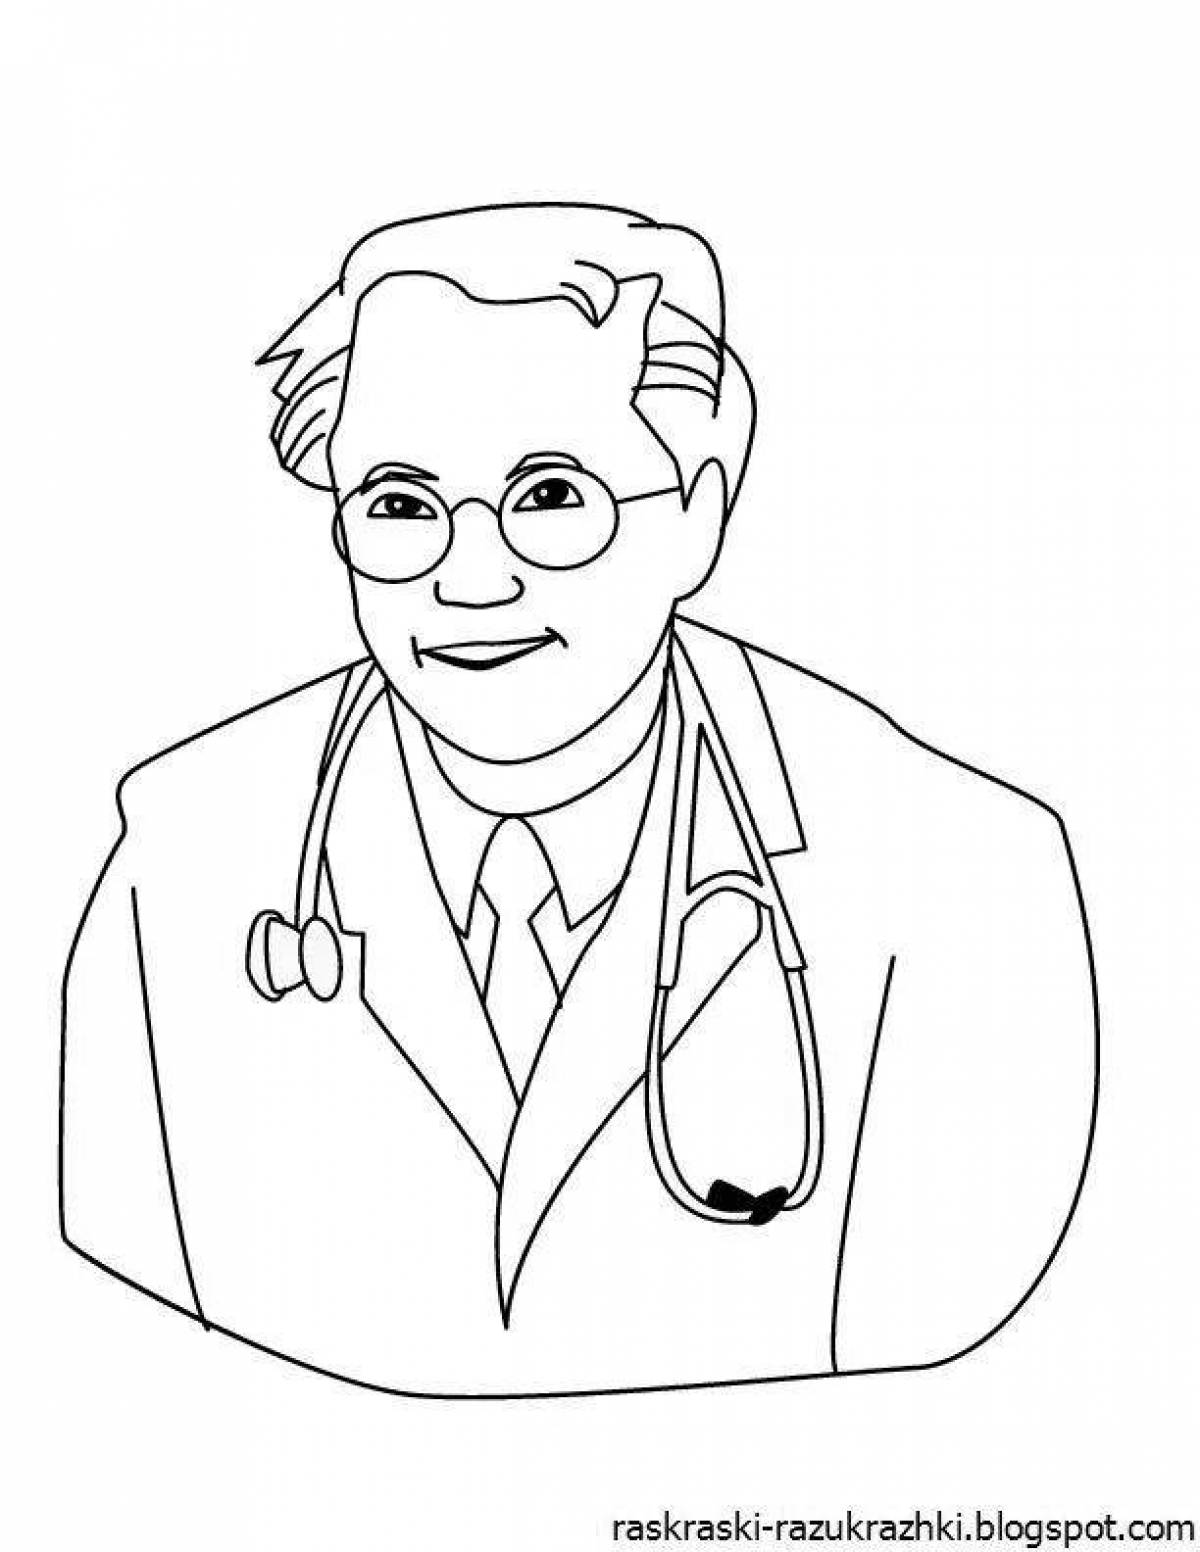 Coloring book bright doctor figurine